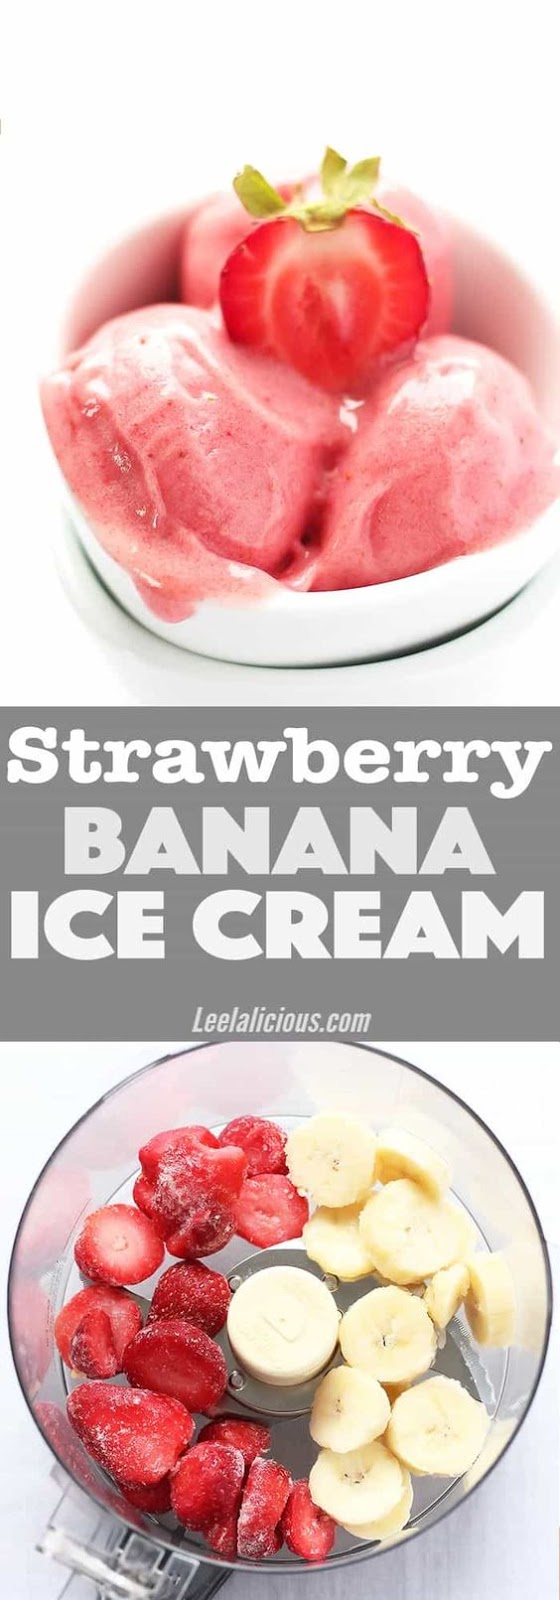 If you are looking for a healthy frozen treat, you HAVE to learn how to make this simple 2 ingredient Strawberry Banana Ice Cream at home. It is clean eating, dairy free, vegan, paleo and requires no added sugar. Kids love this homemade strawberry ice cream and it is a great recipe to get them involved in the process. #icecream #summer #dessert #healthy #vegan #recipe Video | Food Processor | Just Fruit | Soft Serve | Blenders | Simple | Snacks | Summer Desserts